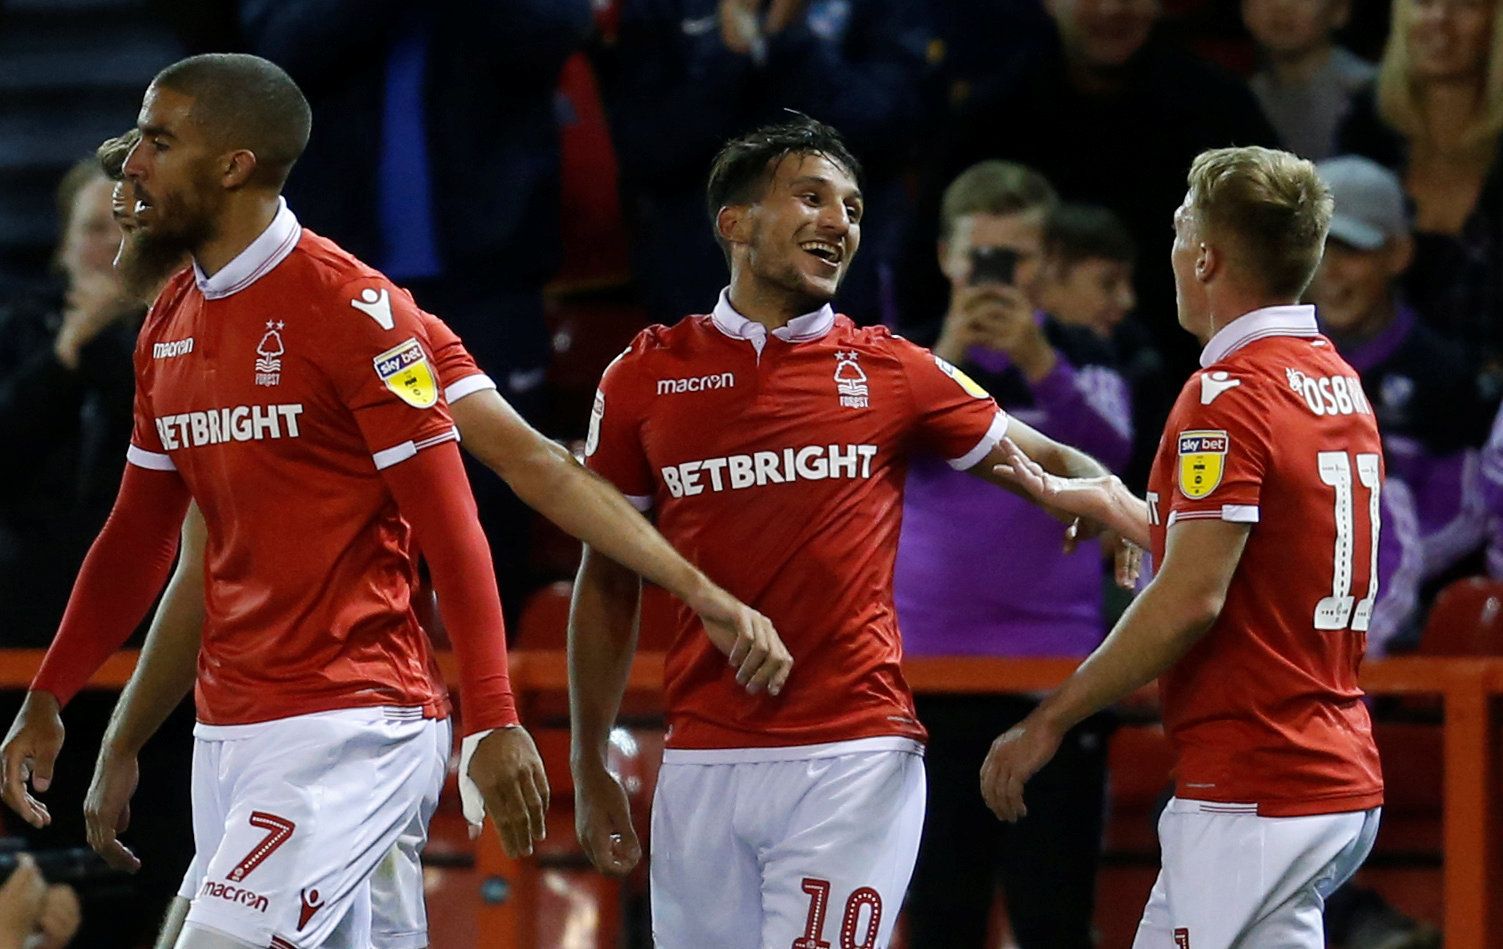 Soccer Football - Championship - Nottingham Forest v Sheffield Wednesday - The City Ground, Nottingham, Britain - September 19, 2018  Nottingham Forest's Joao Carvalho celebrates scoring their second goal with team mates   Action Images/Ed Sykes  EDITORIAL USE ONLY. No use with unauthorized audio, video, data, fixture lists, club/league logos or 